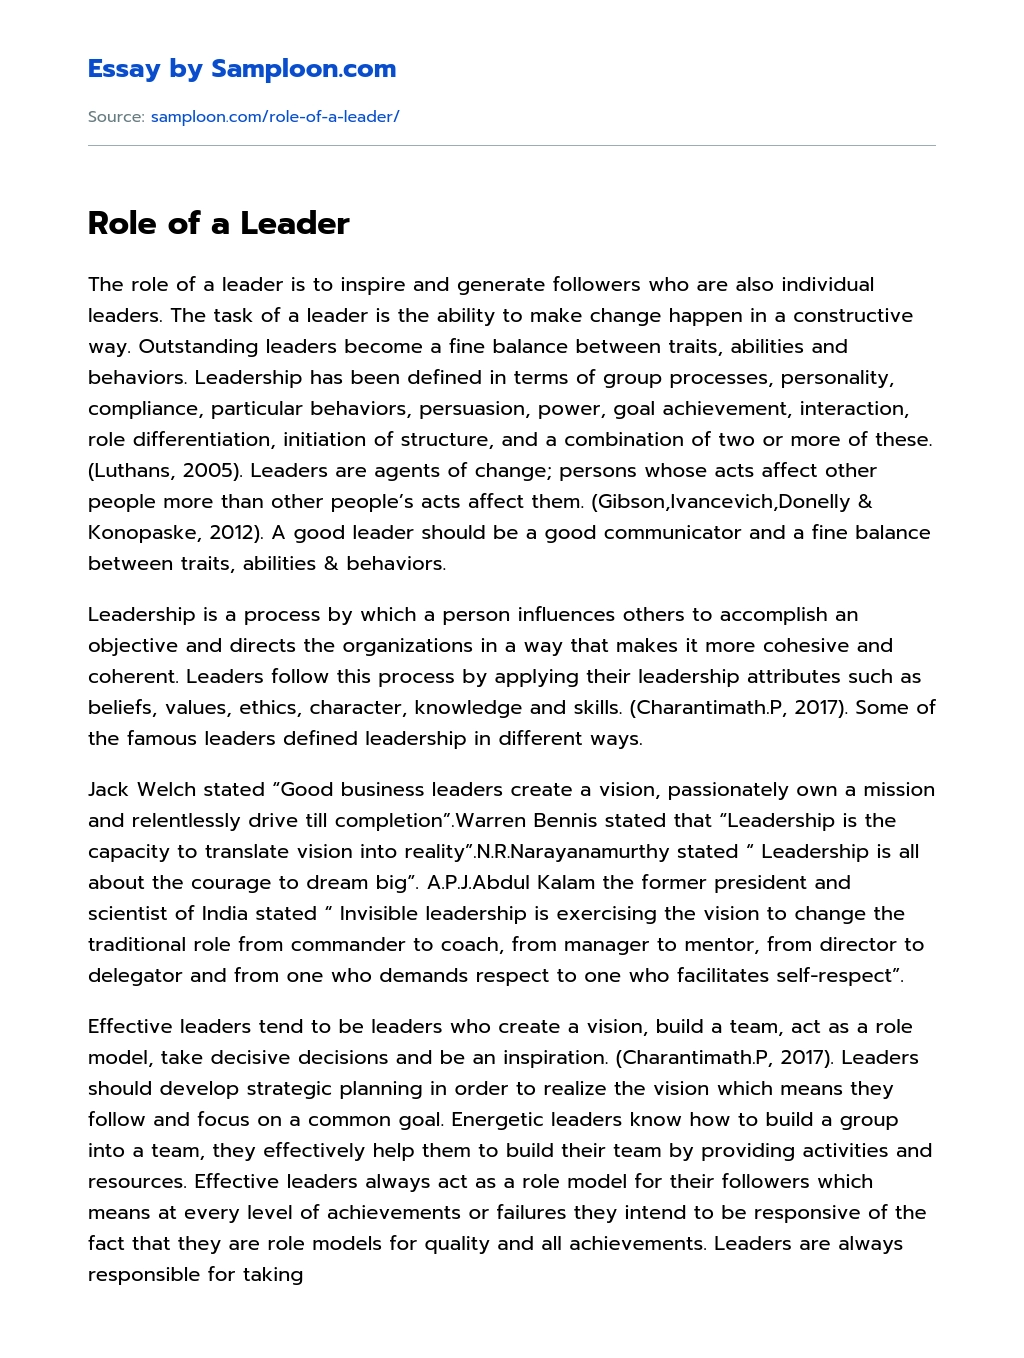 Role of a Leader Personal Essay essay